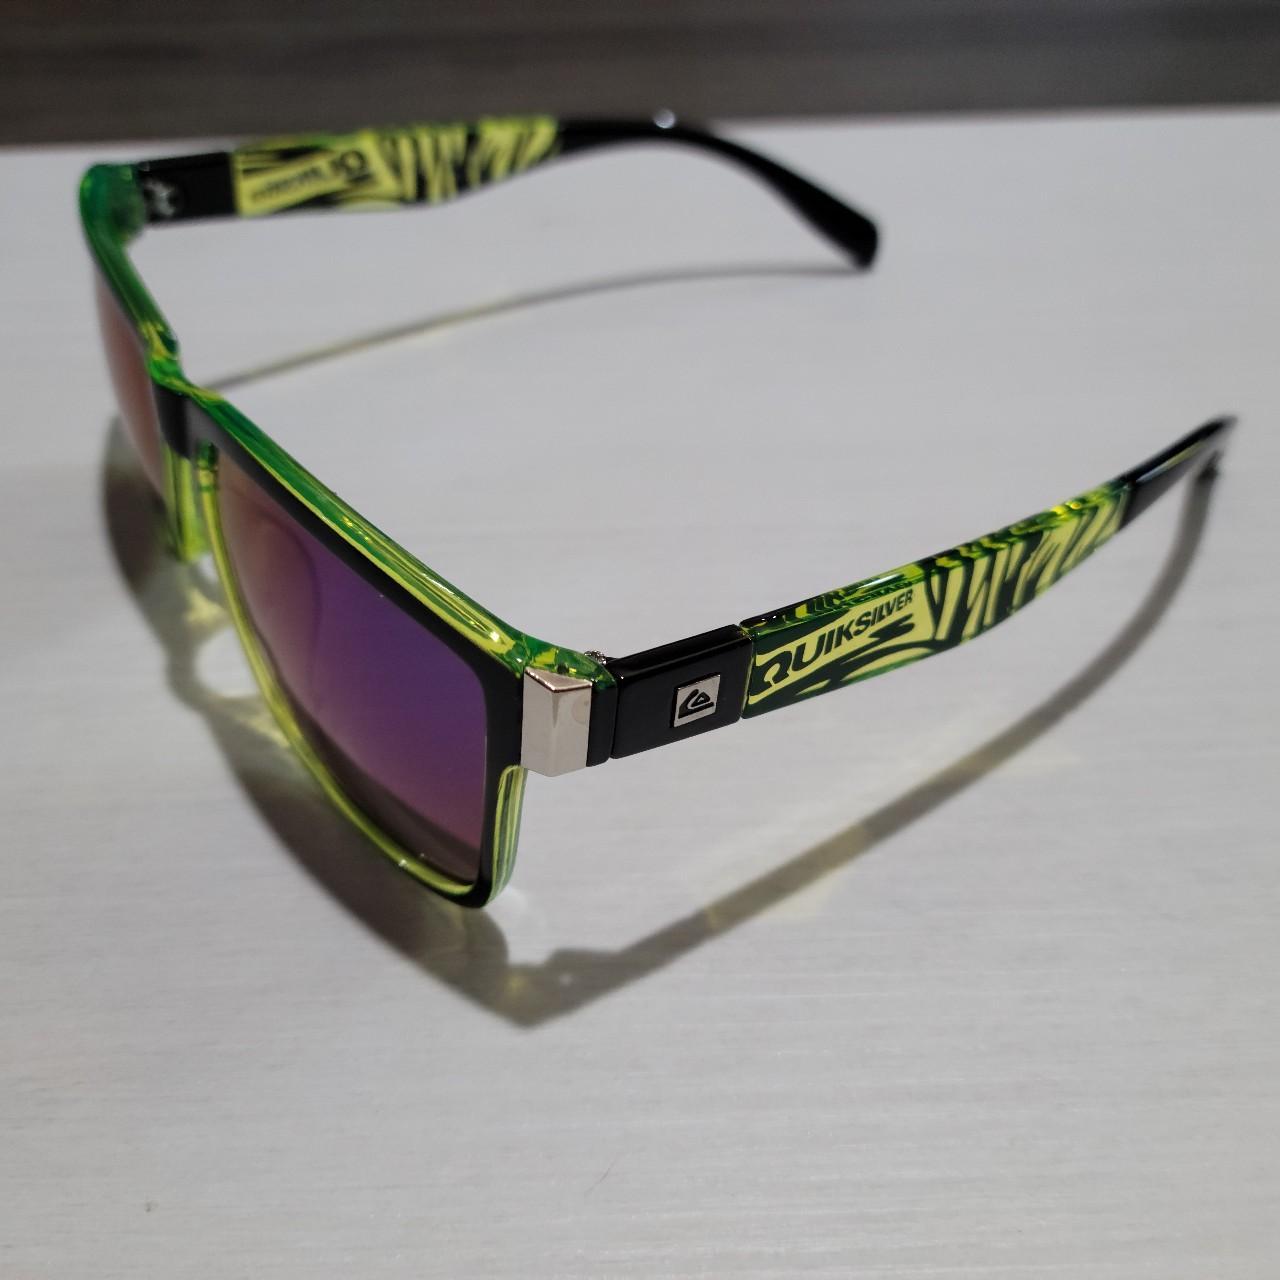 New polarized quiksilver sunglasses, green and black... - Depop